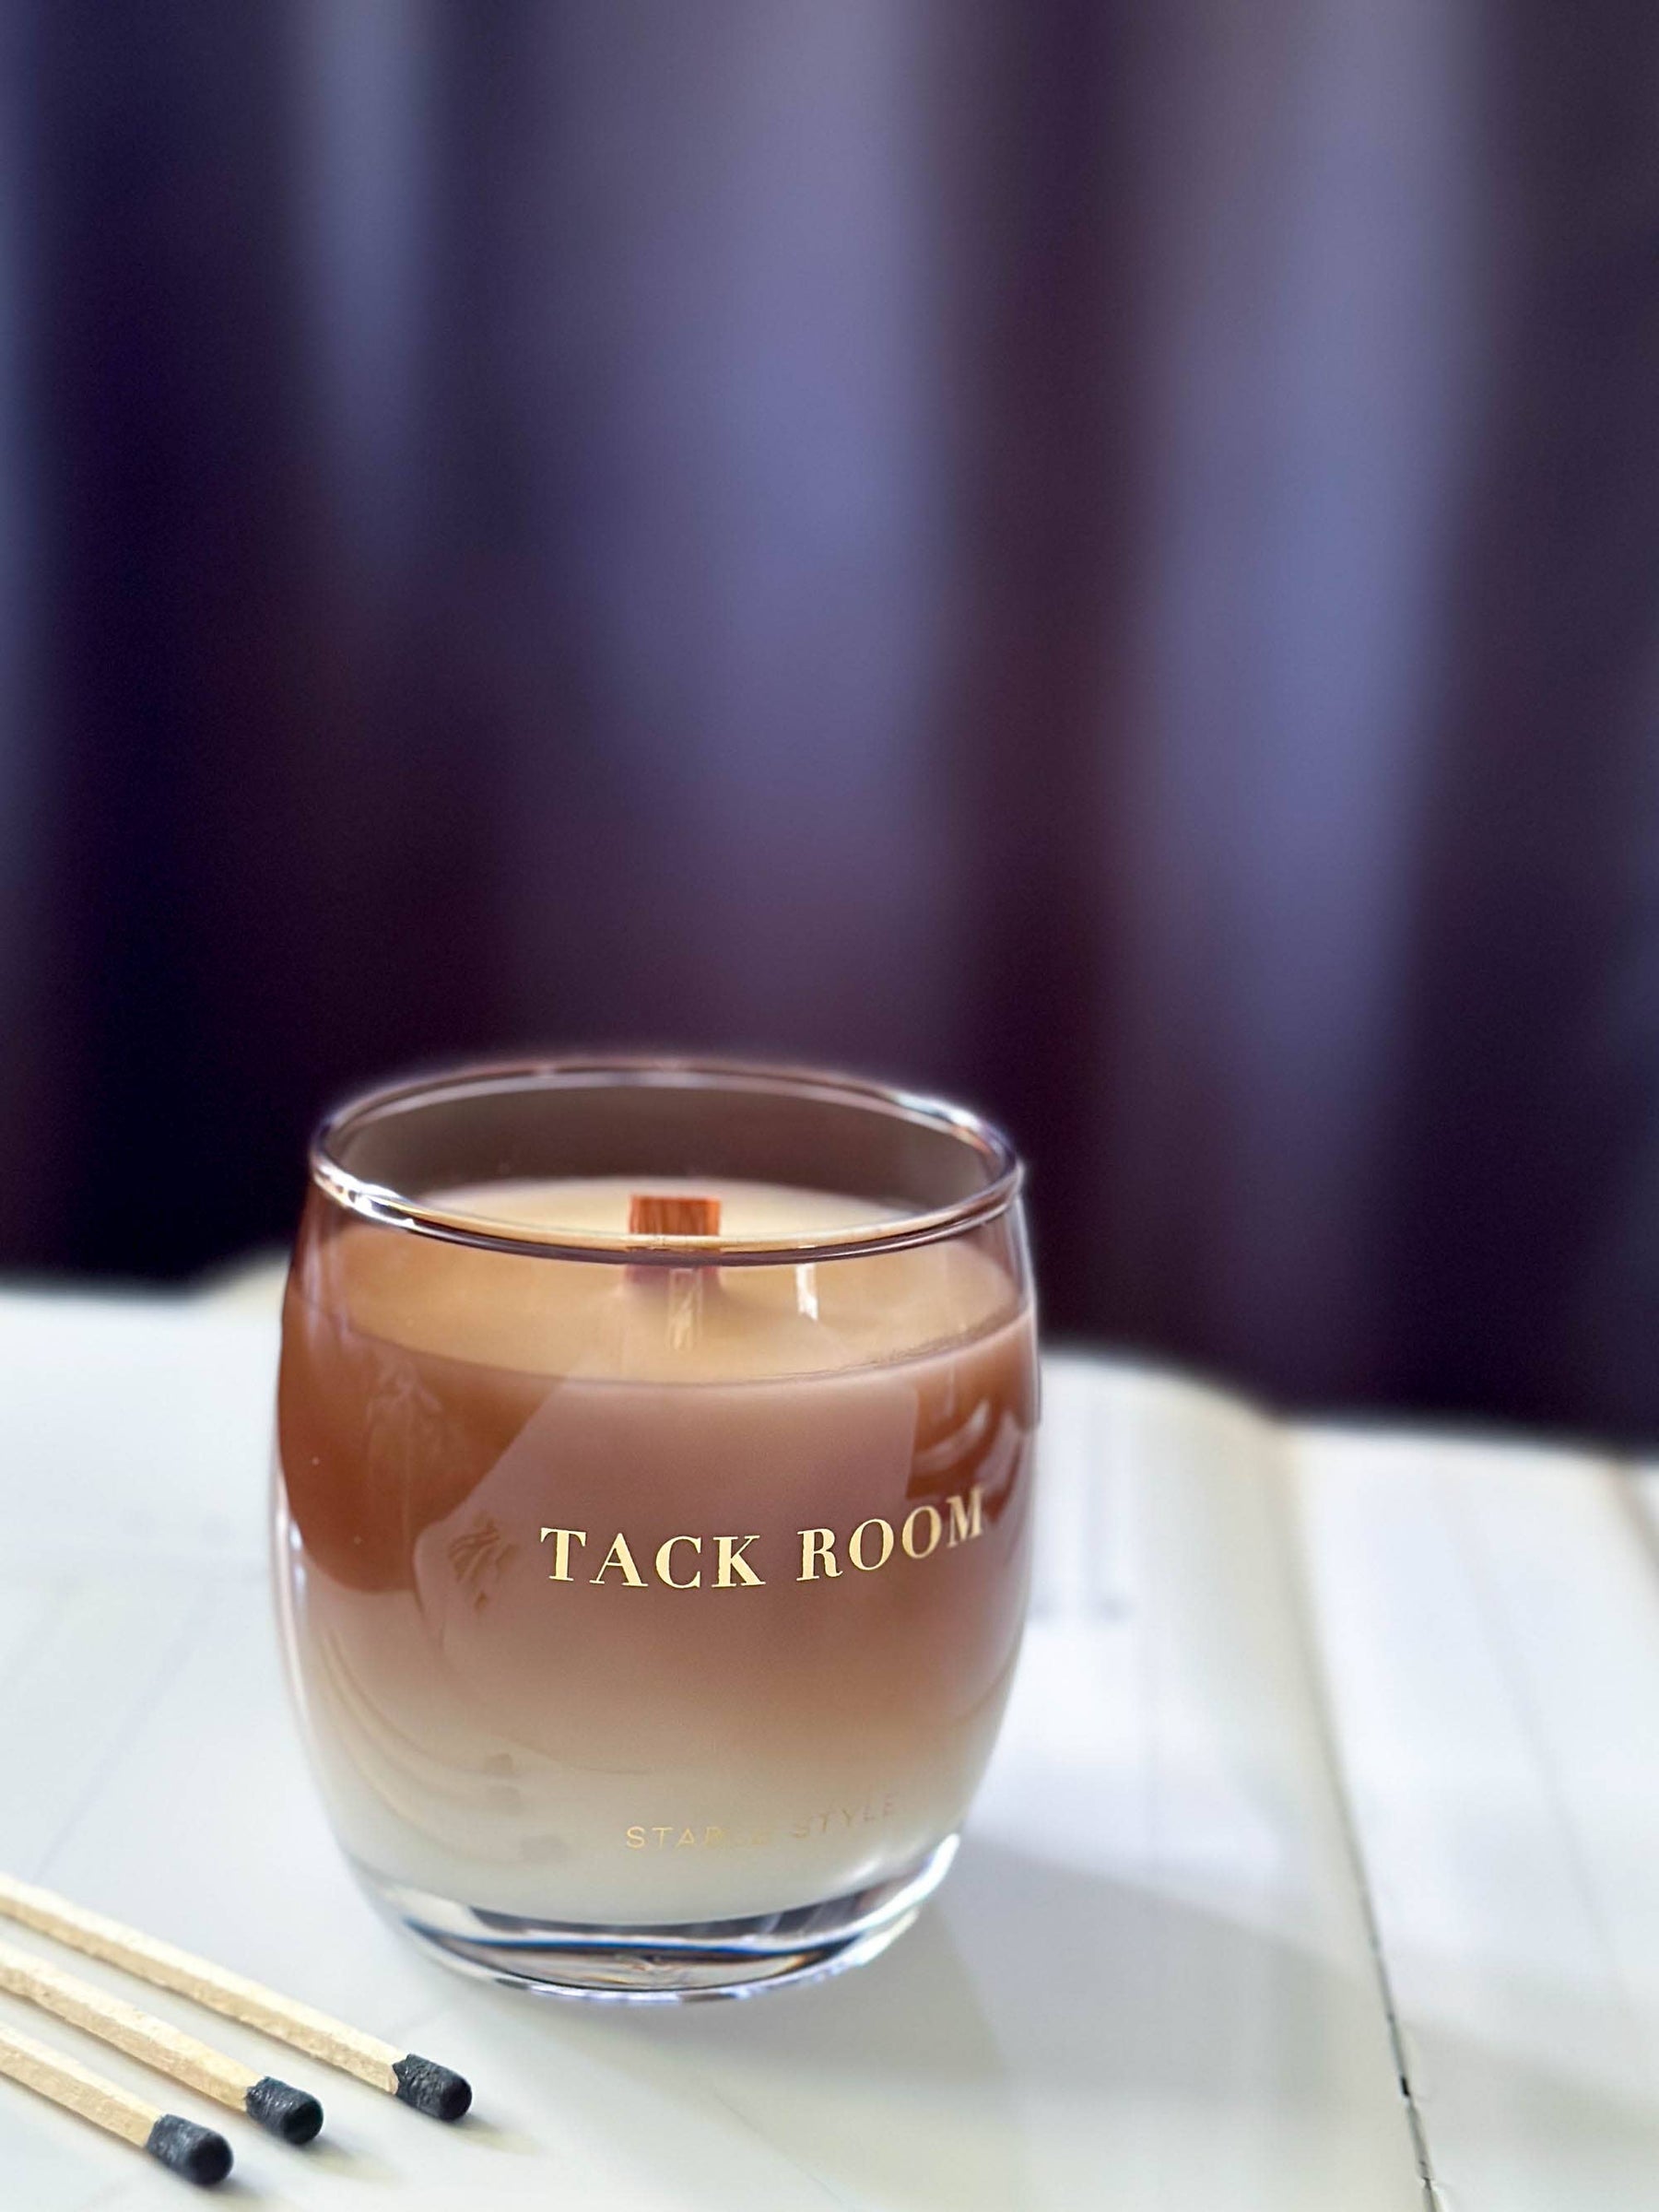 The Tack Room Soy Candle